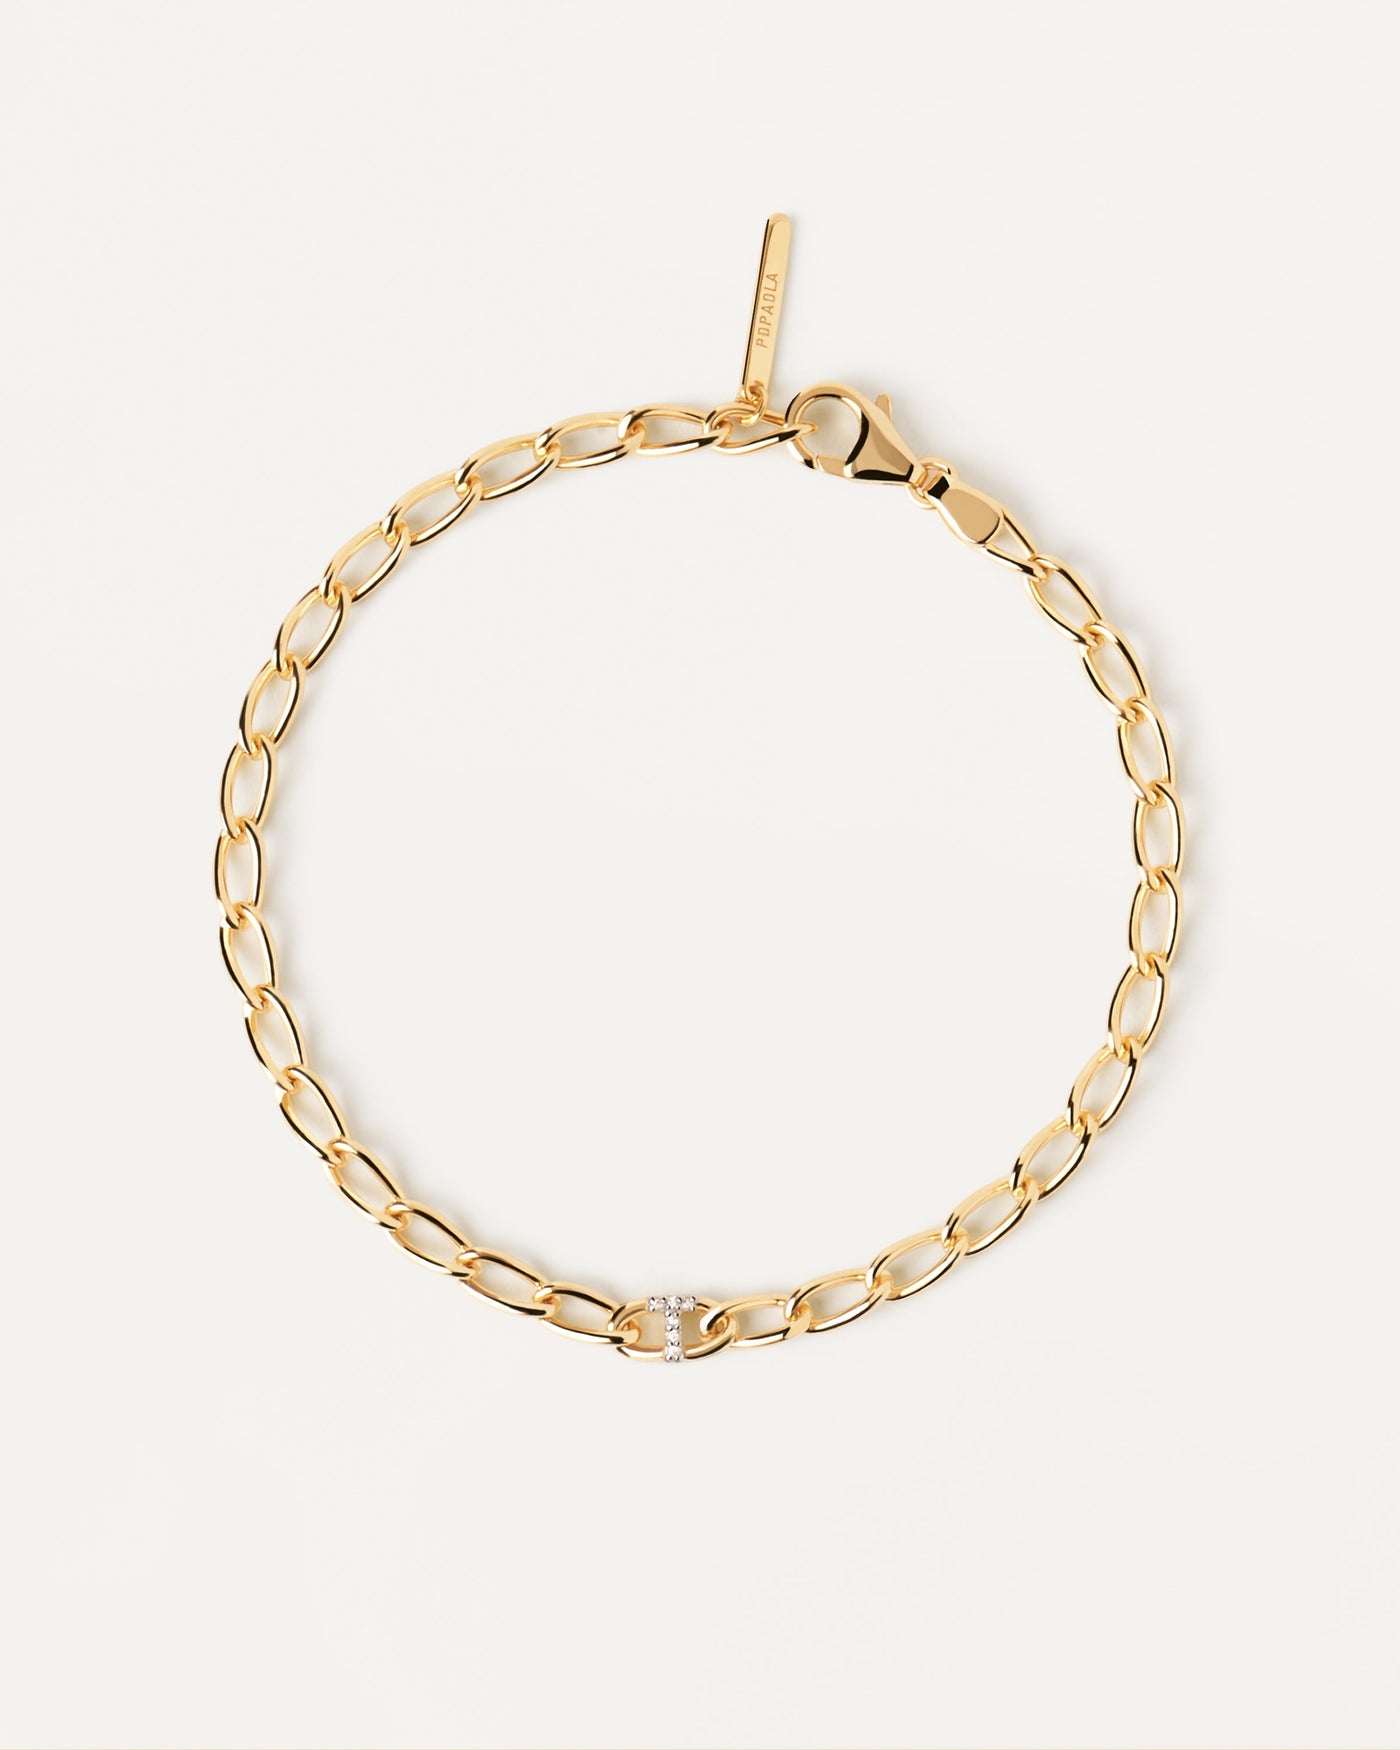 2023 Selection | Letter T Chain Bracelet. cable chain bracelet in gold-plated silver with initial T in zirconia. Get the latest arrival from PDPAOLA. Place your order safely and get this Best Seller. Free Shipping.